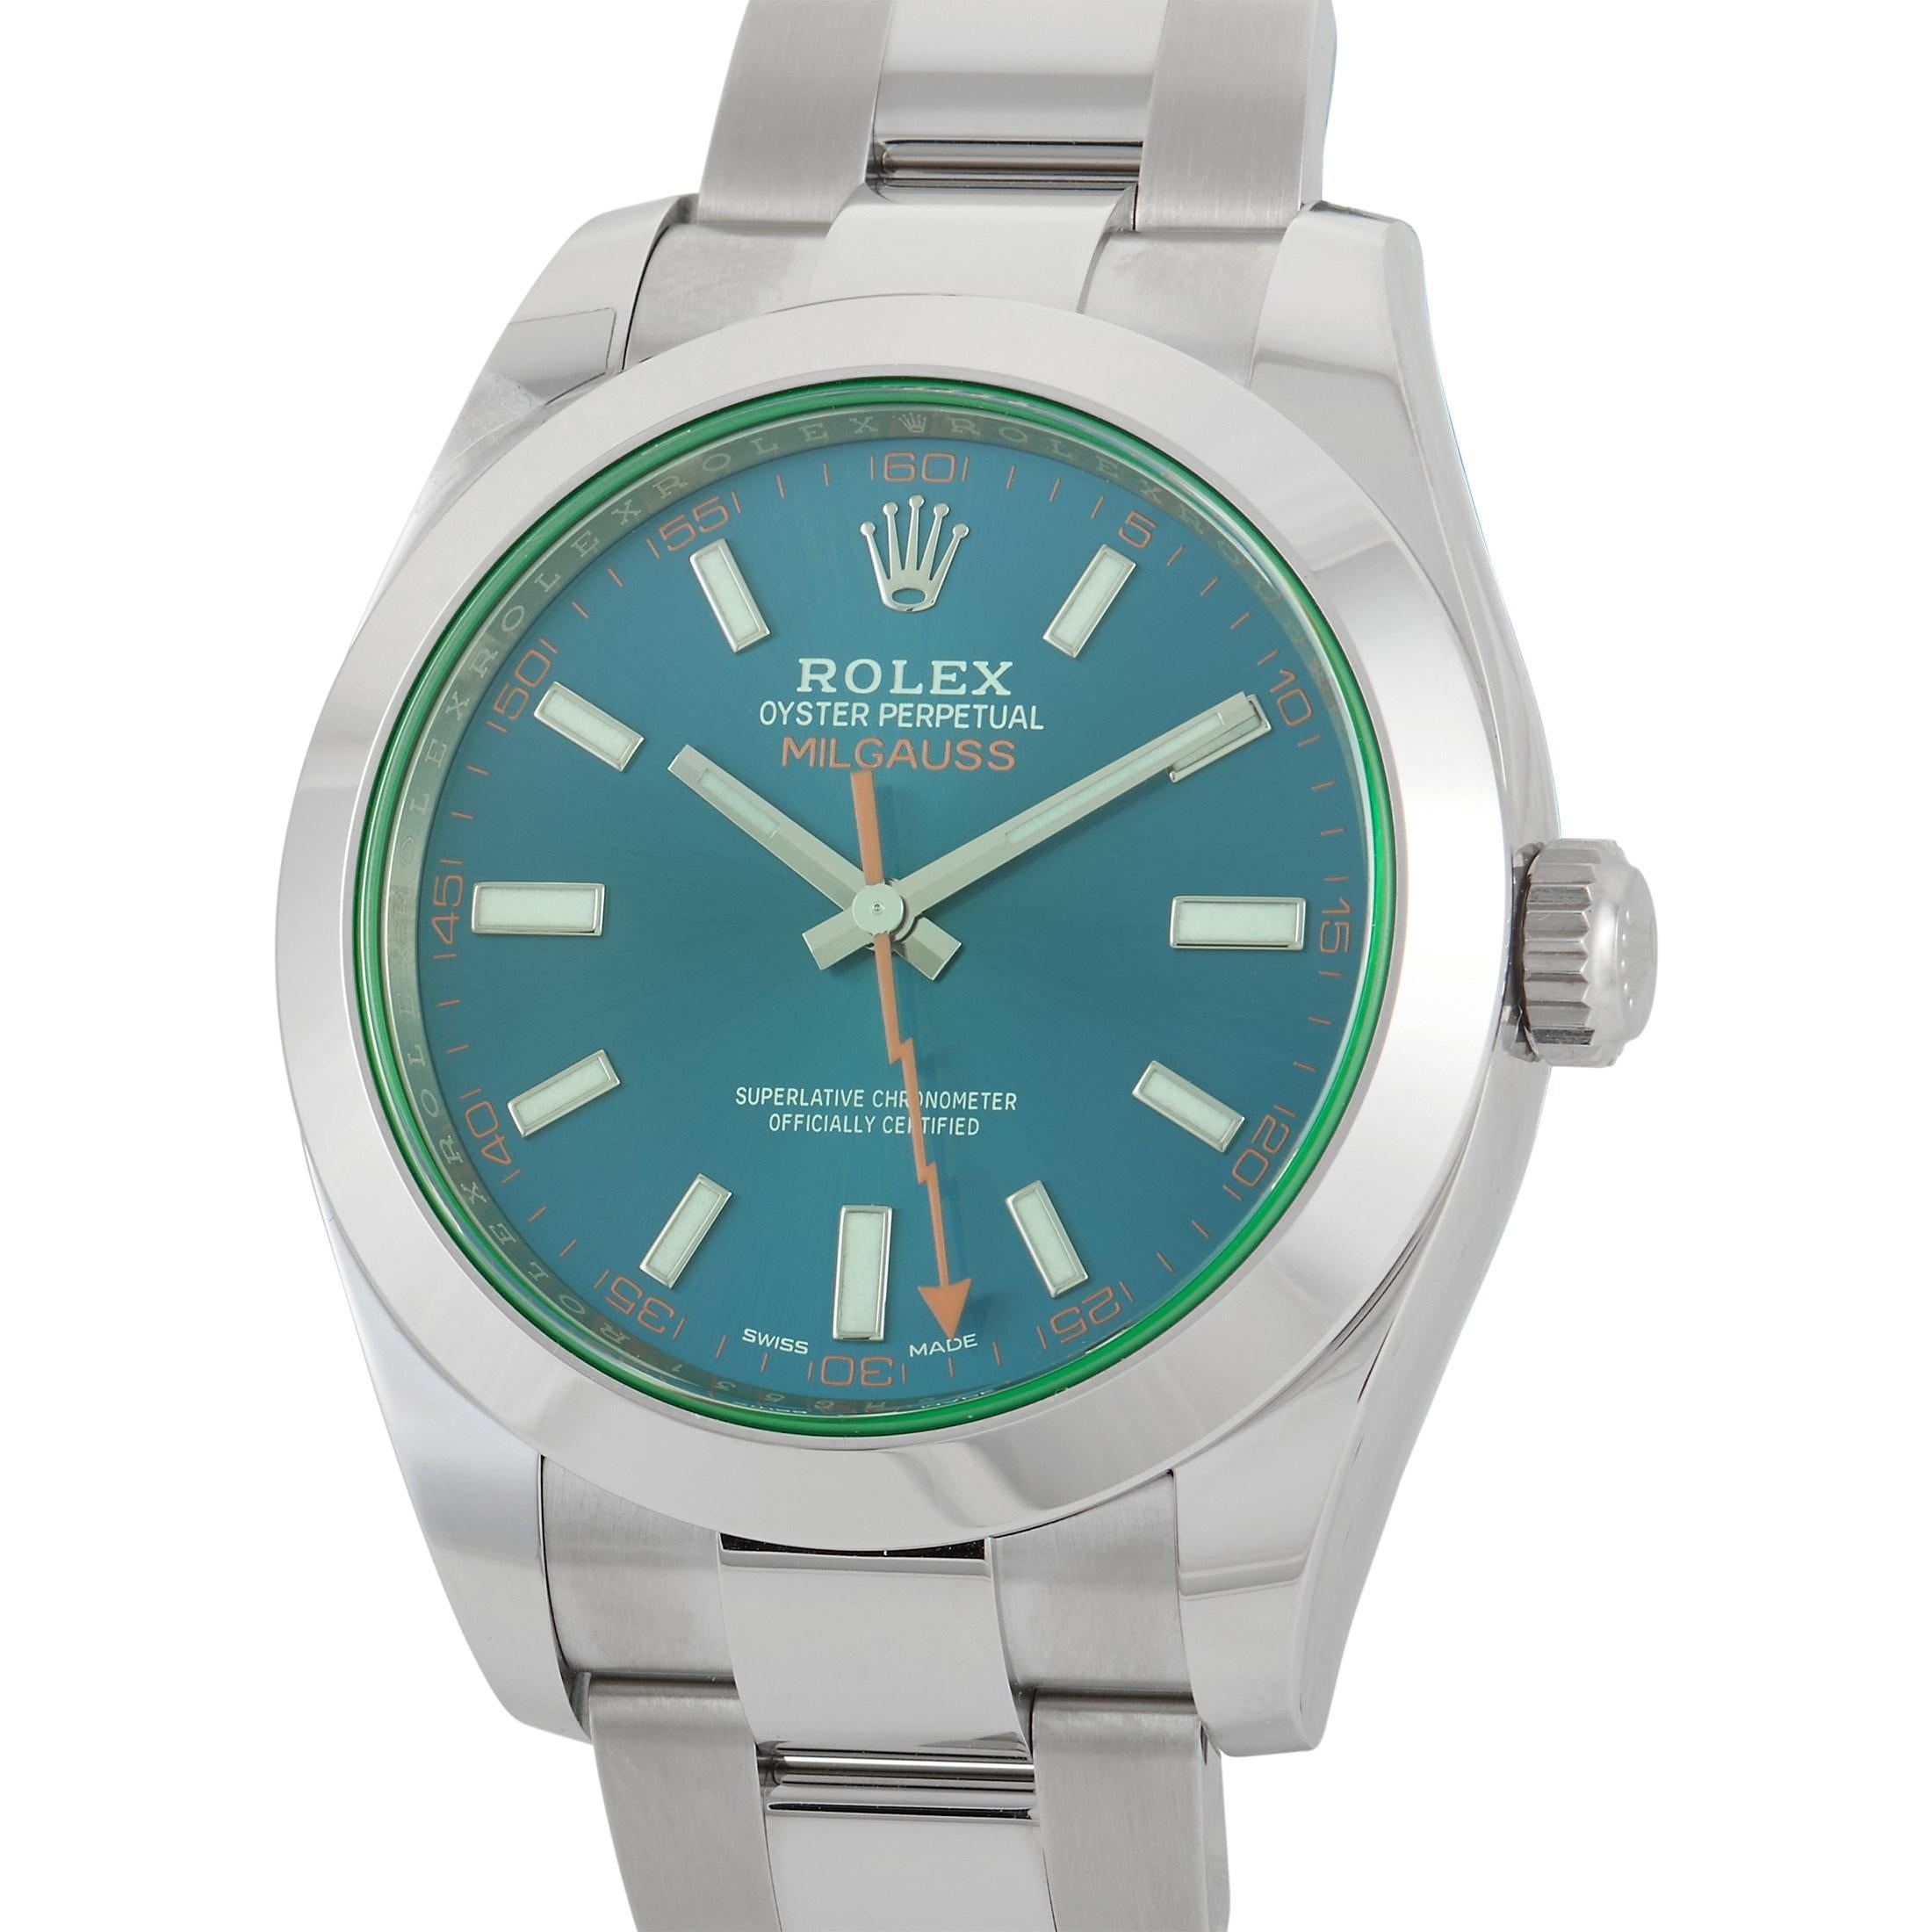 The Rolex Milgauss Watch, reference number 116400GV-0002, will add a bold pop of color to any ensemble. 

This luxury timepiece includes a round 40mm case, bezel, and bracelet crafted from Stainless Steel. A bold blue dial provides the perfect